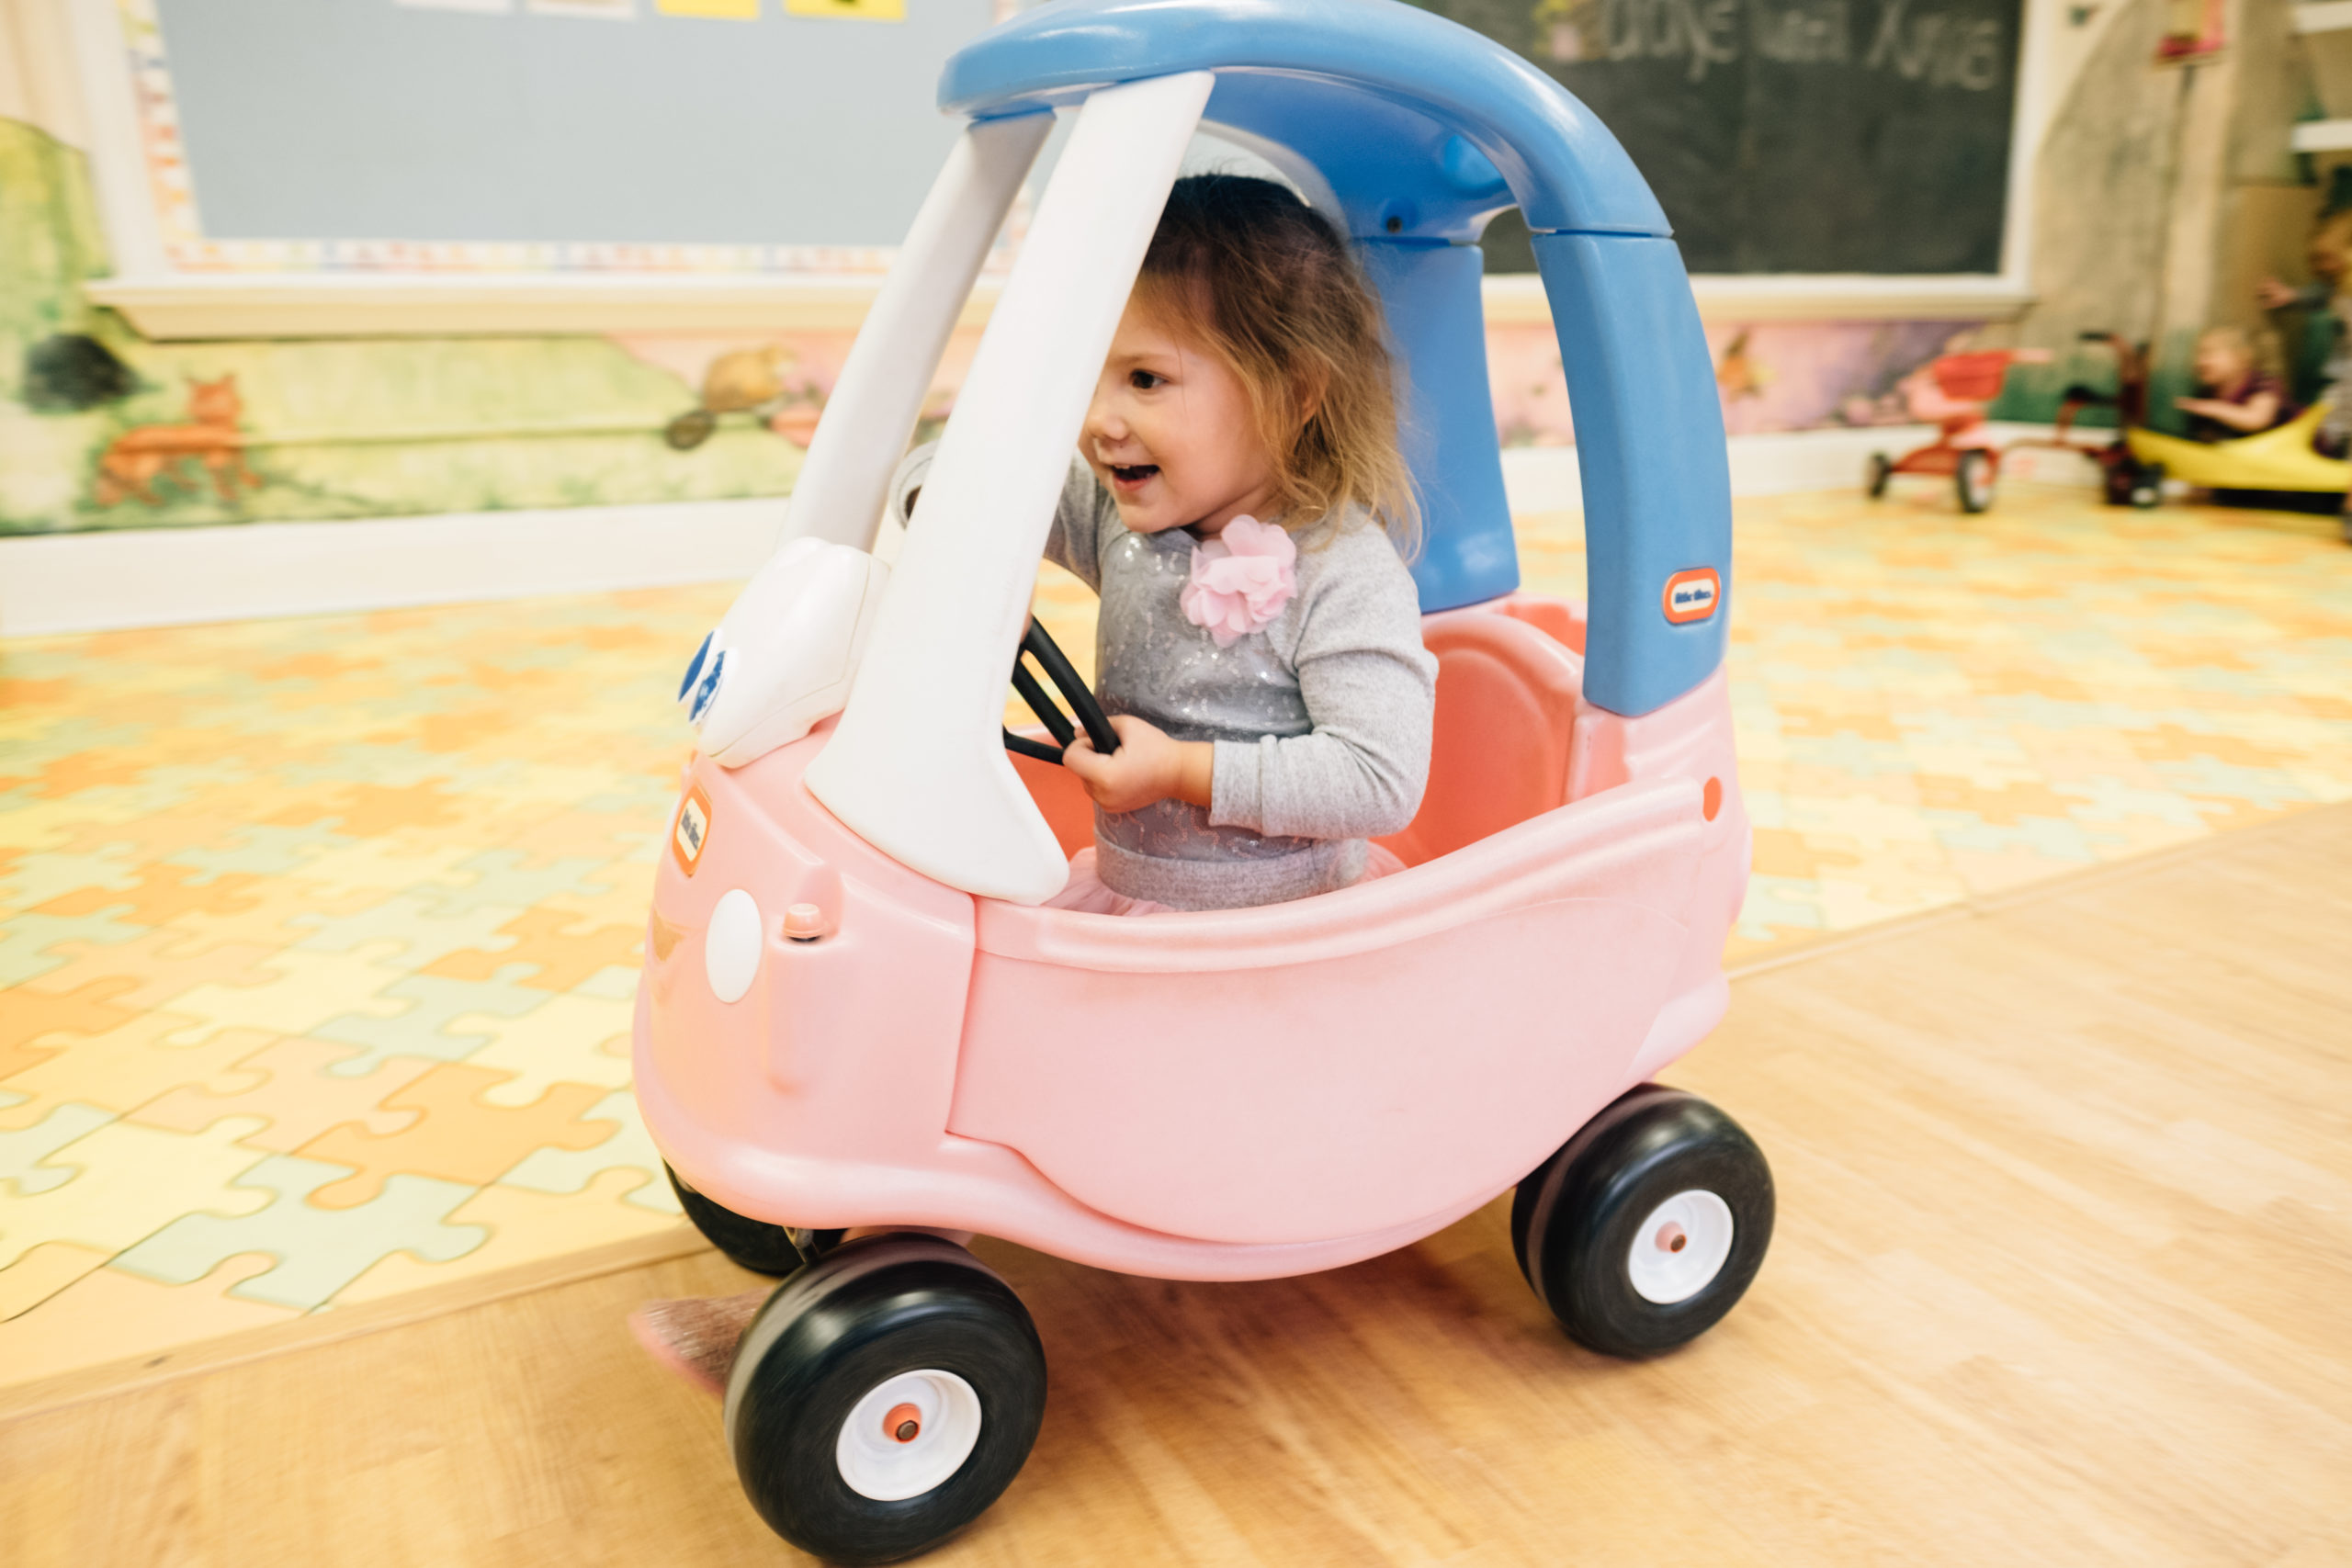 A young toddler riding in a pink and purple toy car.